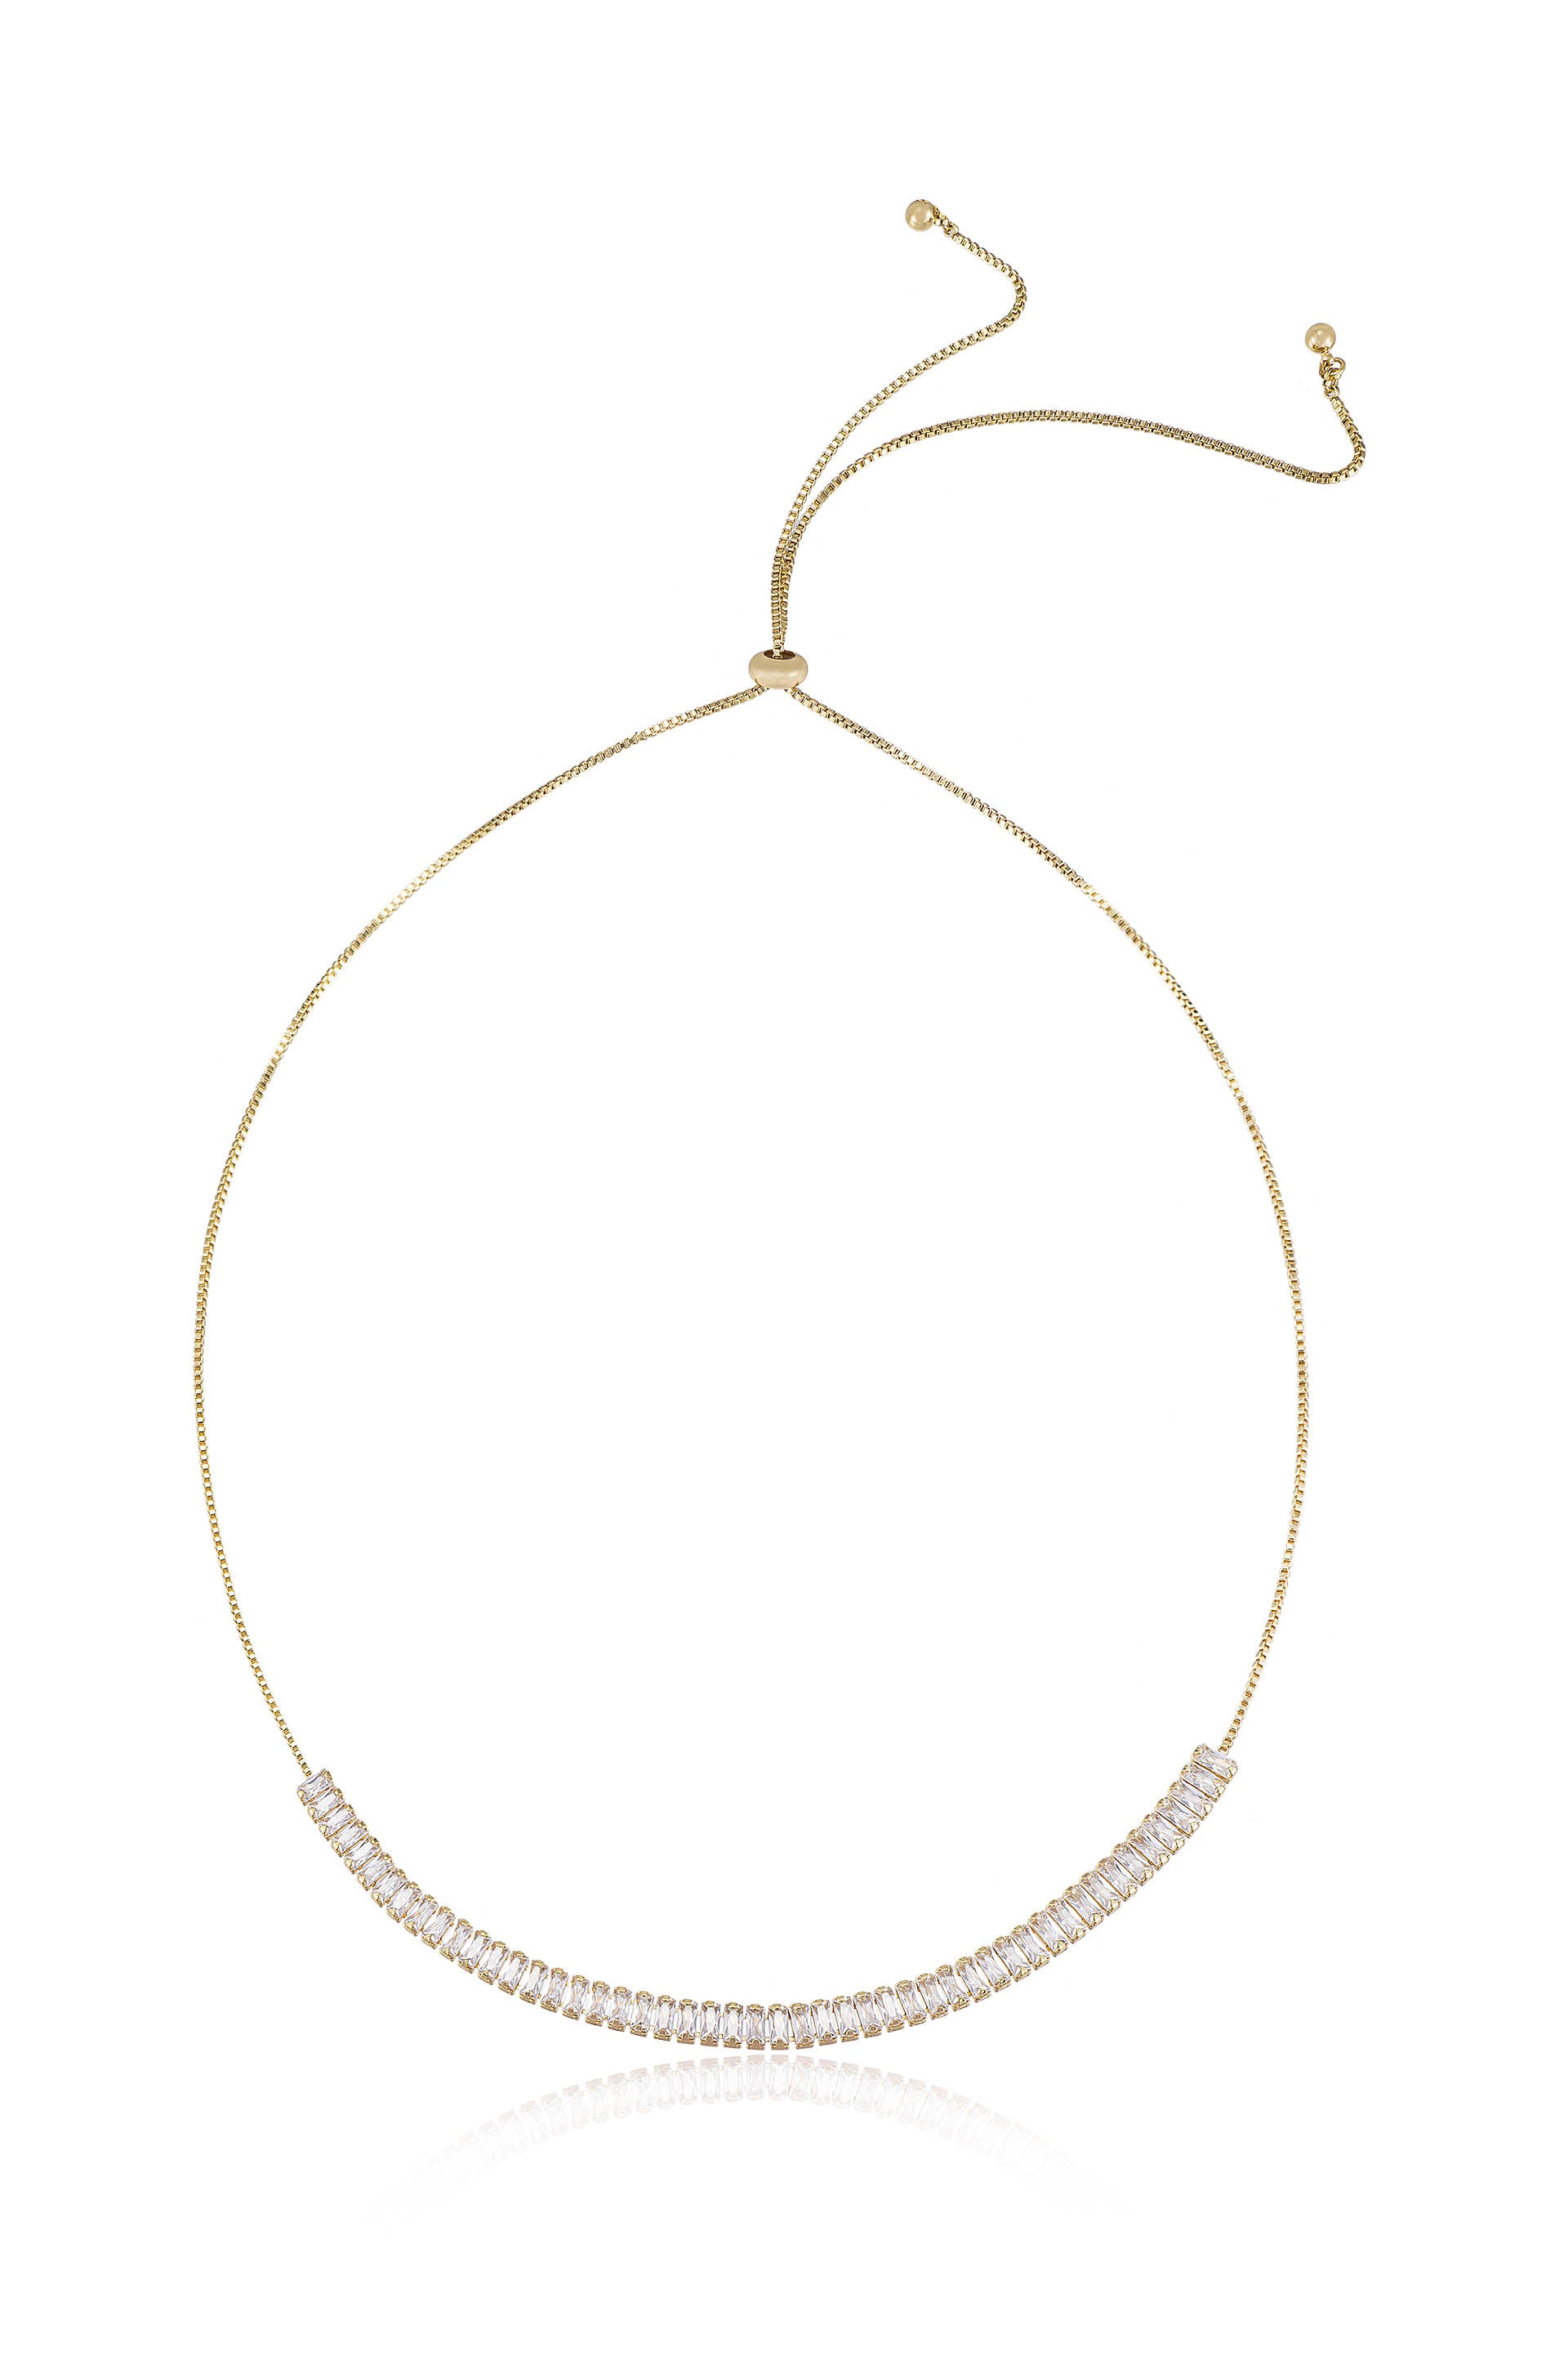 Delicate Crystal Statements 18k Gold Plated Adjustable Necklace